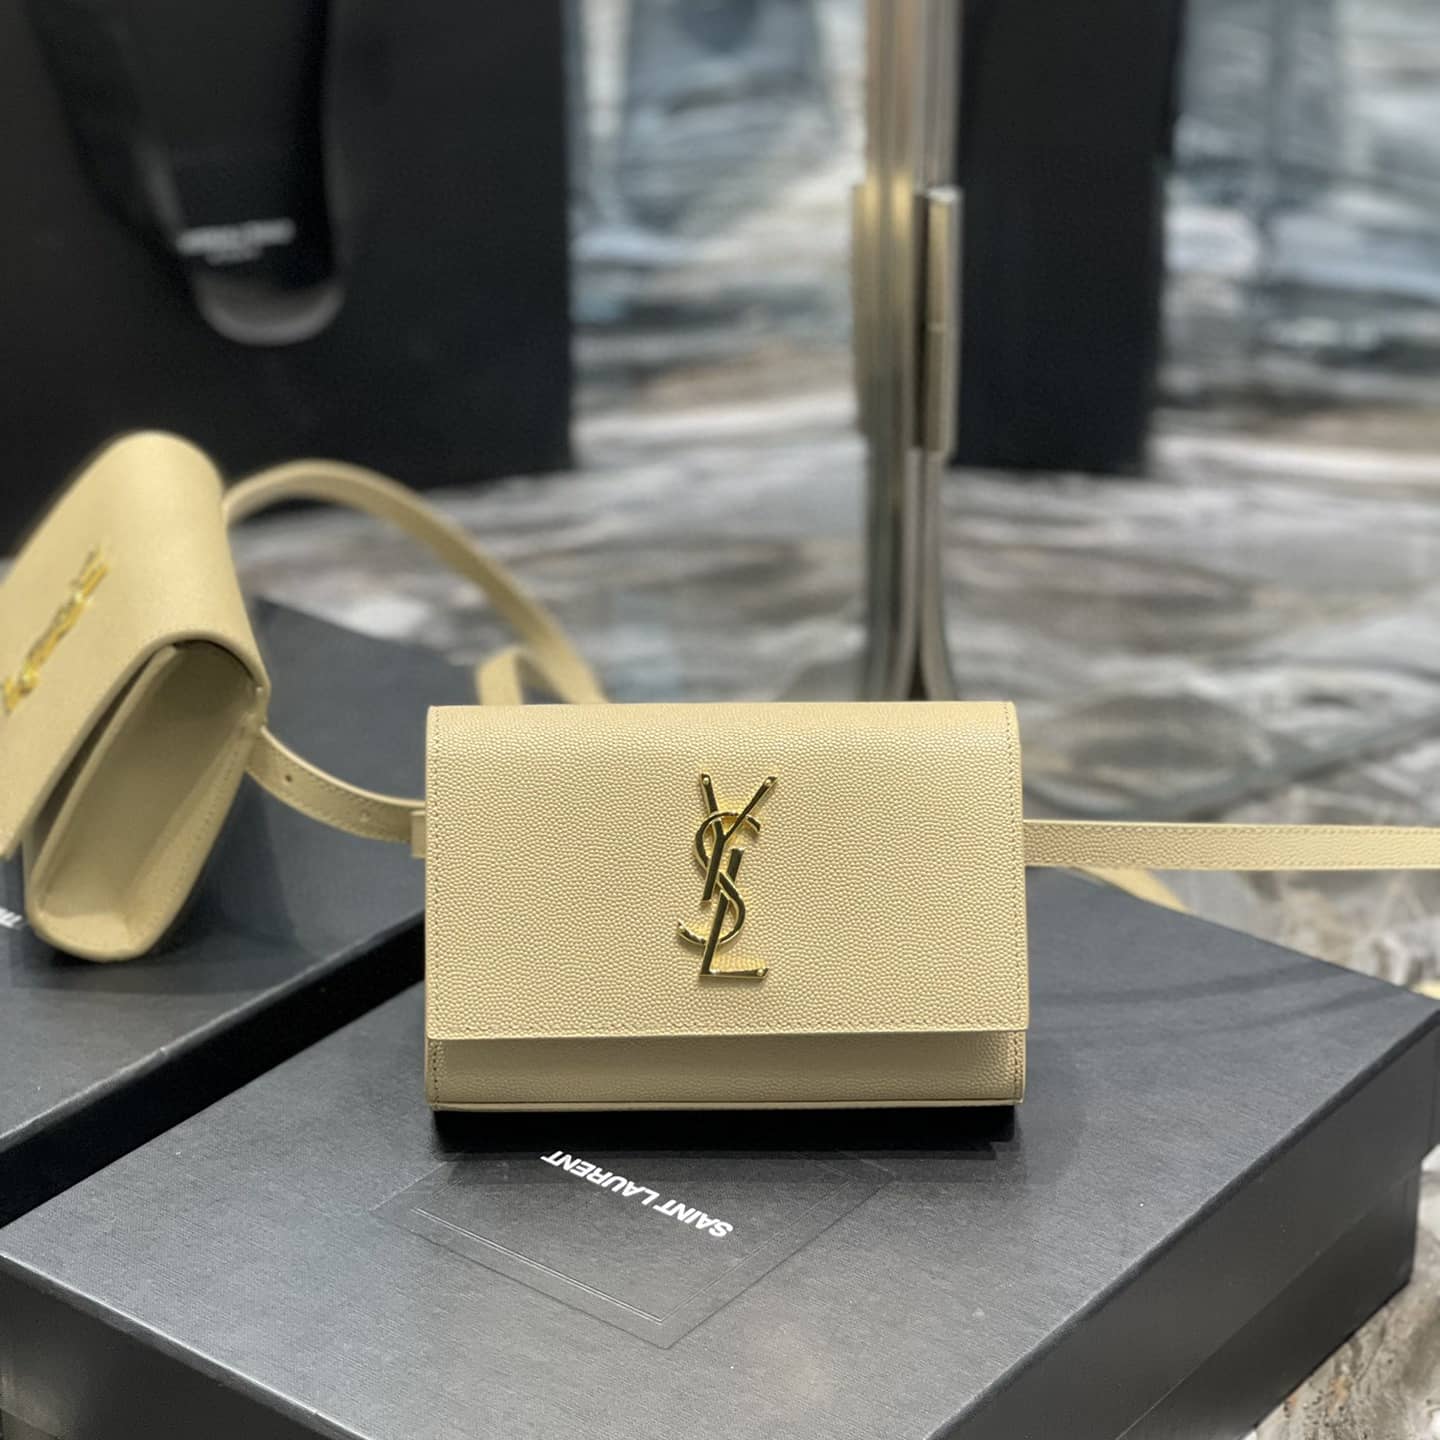 2021 Cheap Saint Laurent kate belt bag in smooth leather